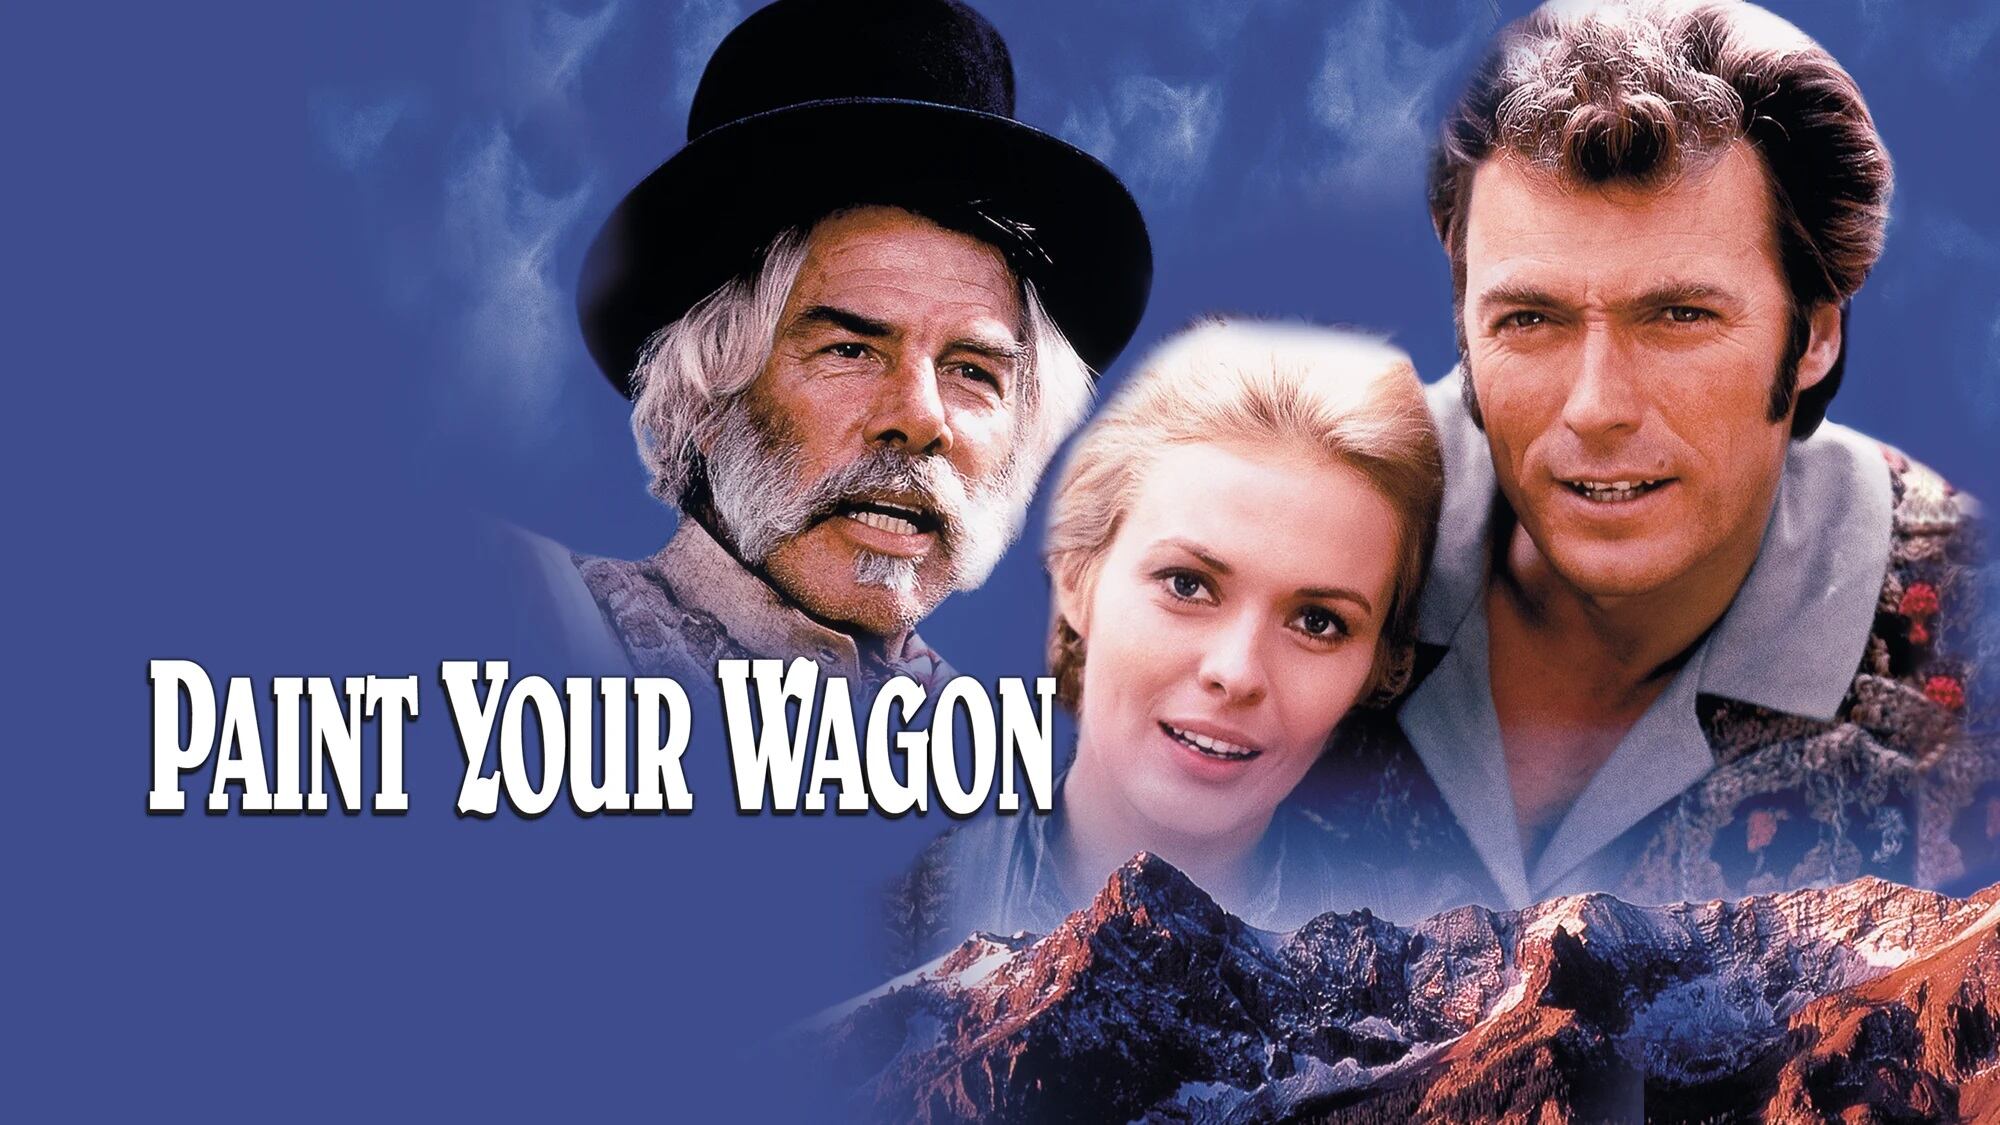 41-facts-about-the-movie-paint-your-wagon